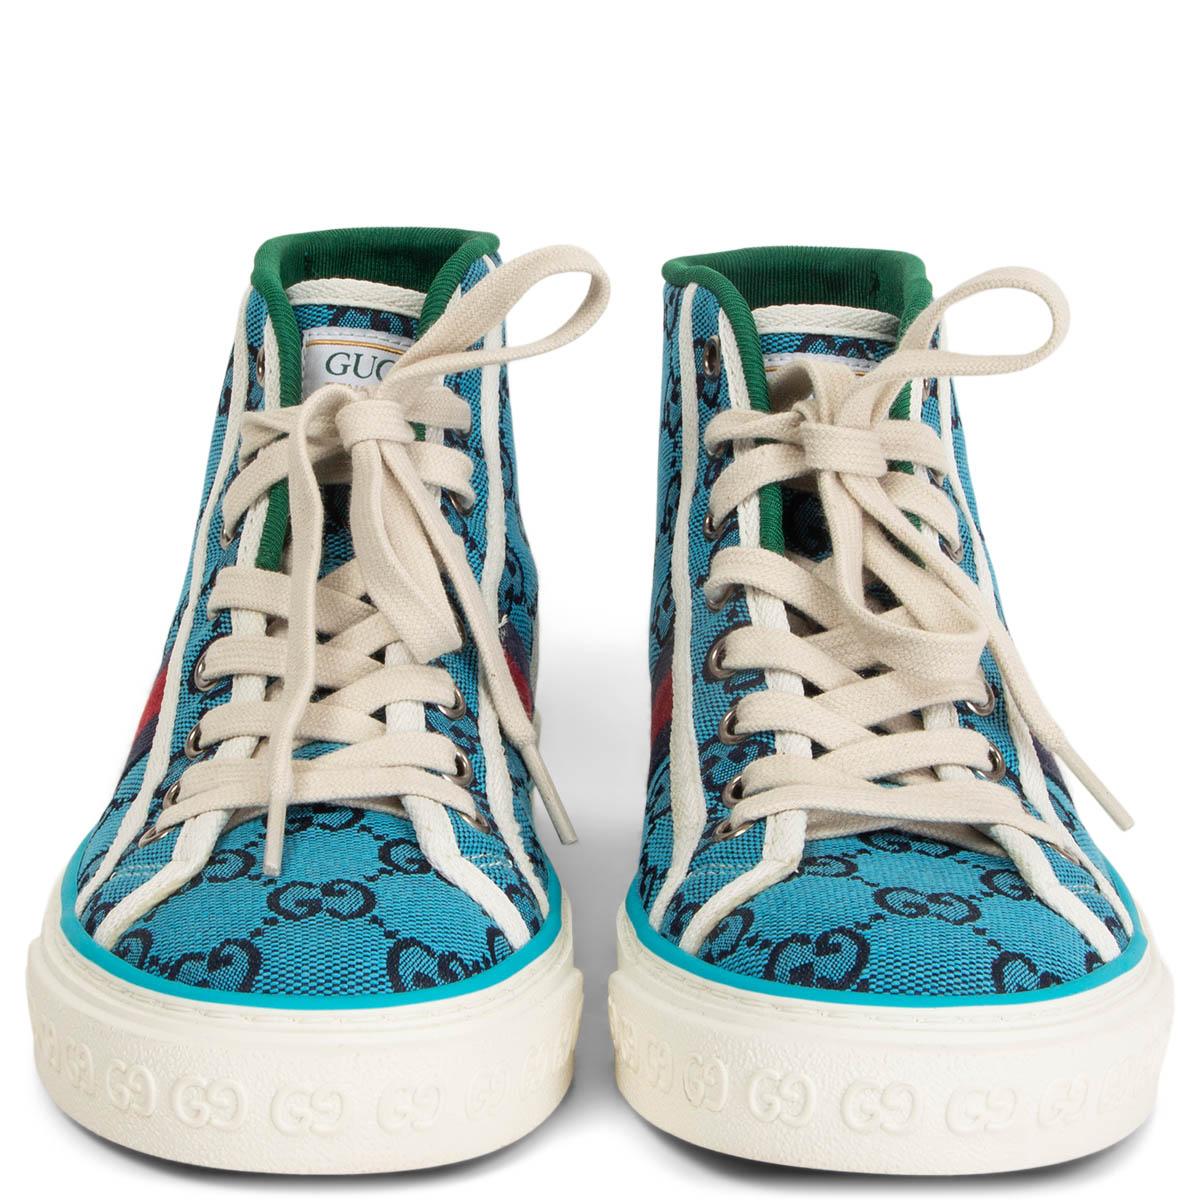 100% authentic Gucci Tennis 1977 high-top sneakers in turquoise and navy monogram canvas with the iconic red and navy Web stripe on the side and white canvas trimming. GG motif at the sole. Brand new. Come with dust bag and extra laces.